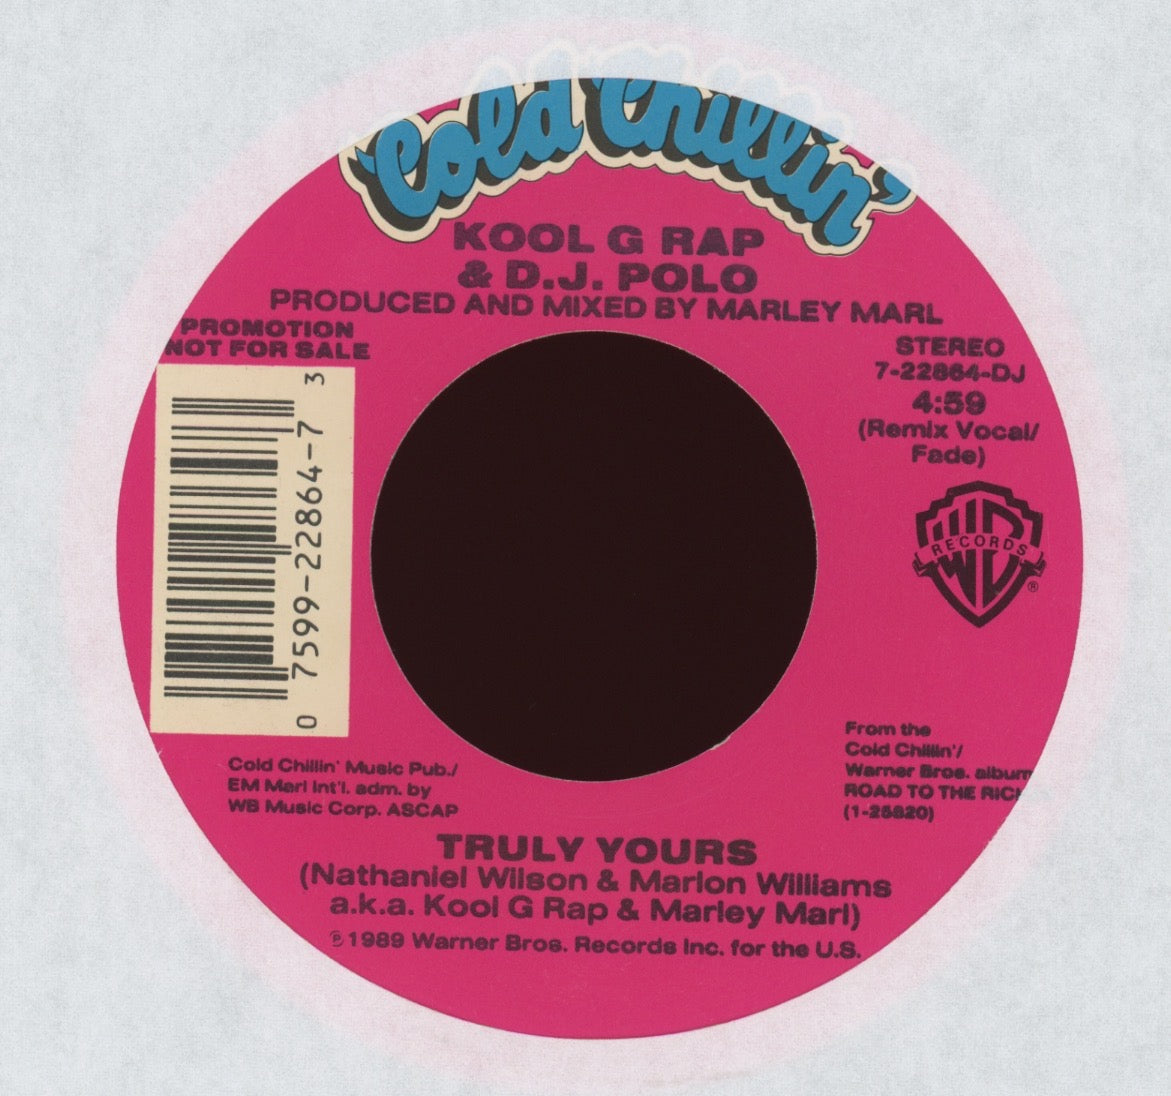 Kool G Rap & D.J. Polo - Truly Yours on Cold Chillin' Promo Rap 45